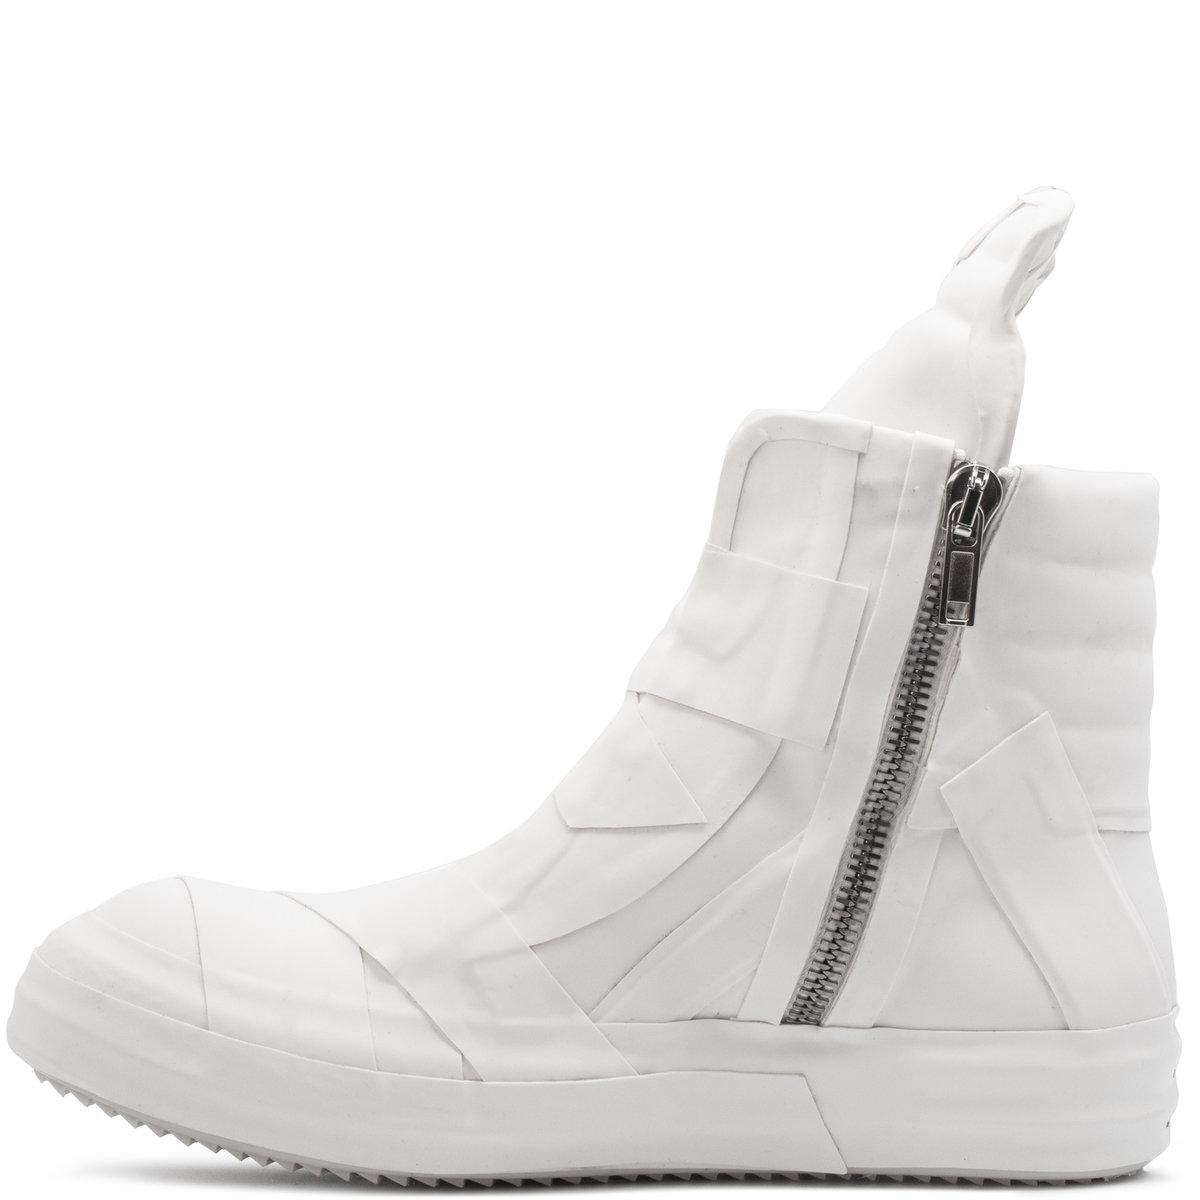 Rick Owens Panelled Geobasket Sneakers in White for Men - Lyst